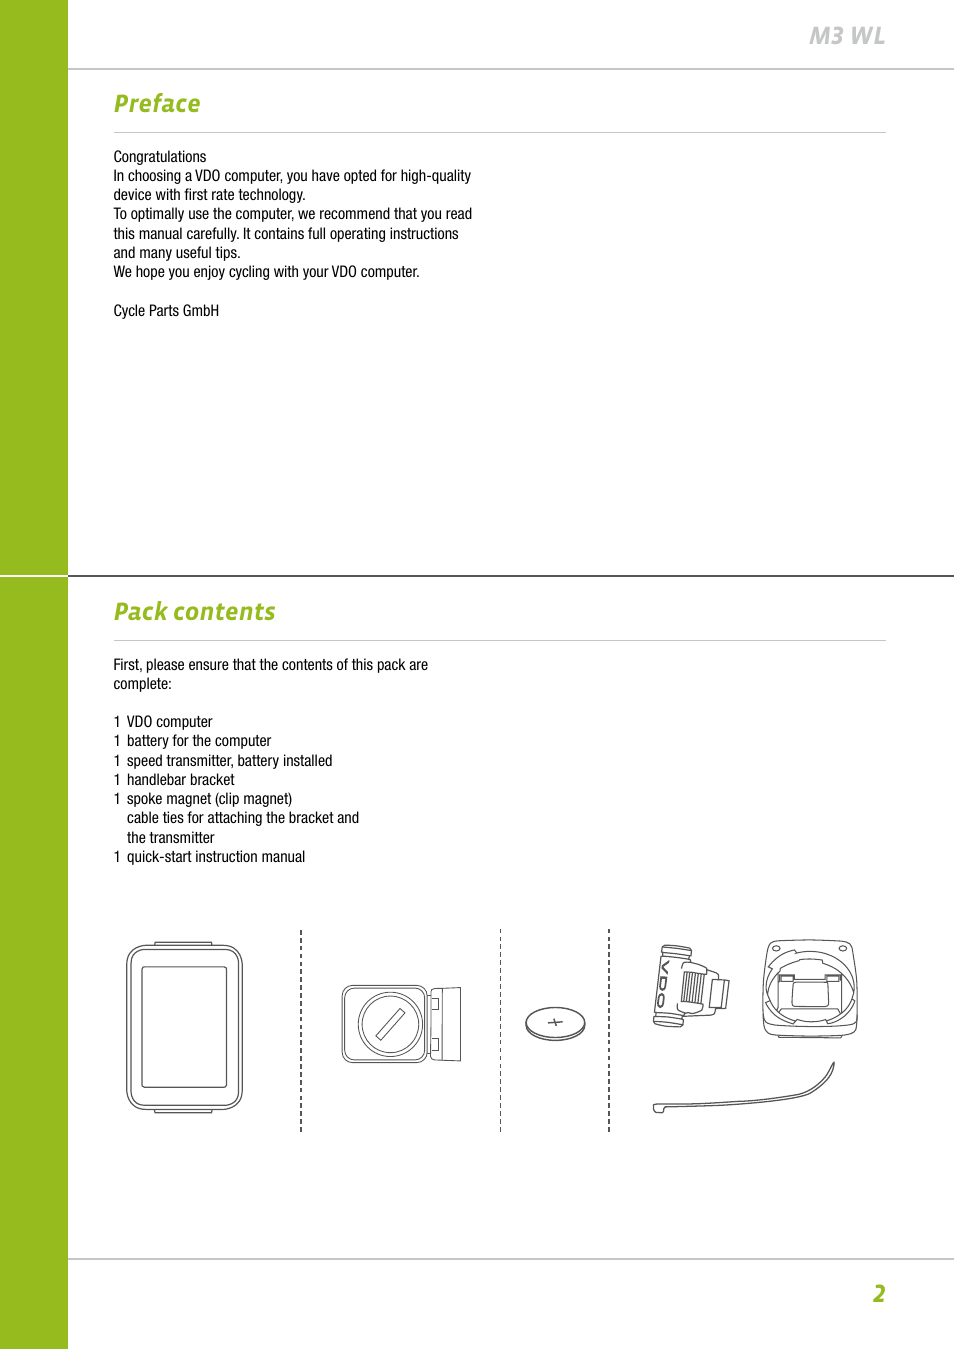 2m3 wl preface pack contents | VDO M3WL User Manual | Page 2 / 41